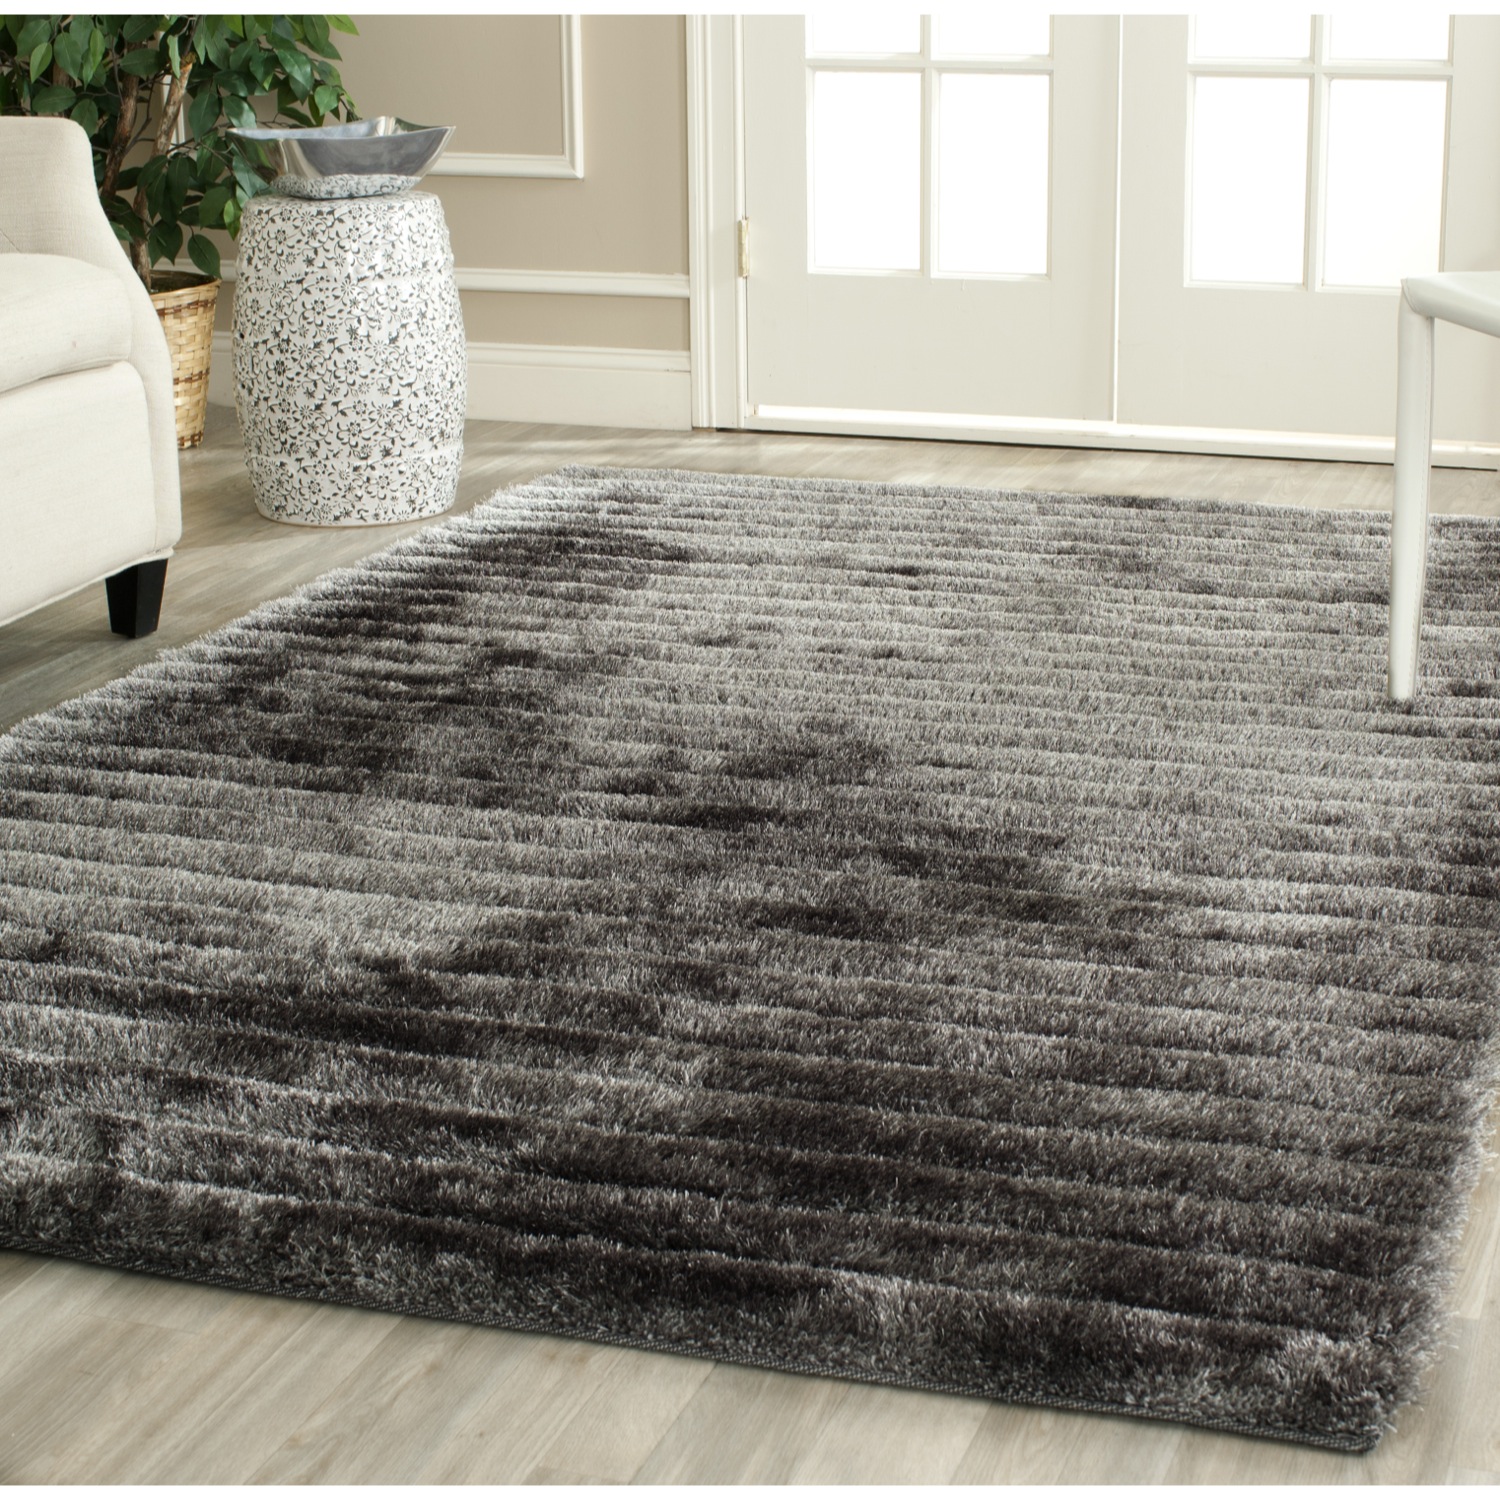 Using shag area rugs is quite beneficial for your house ...